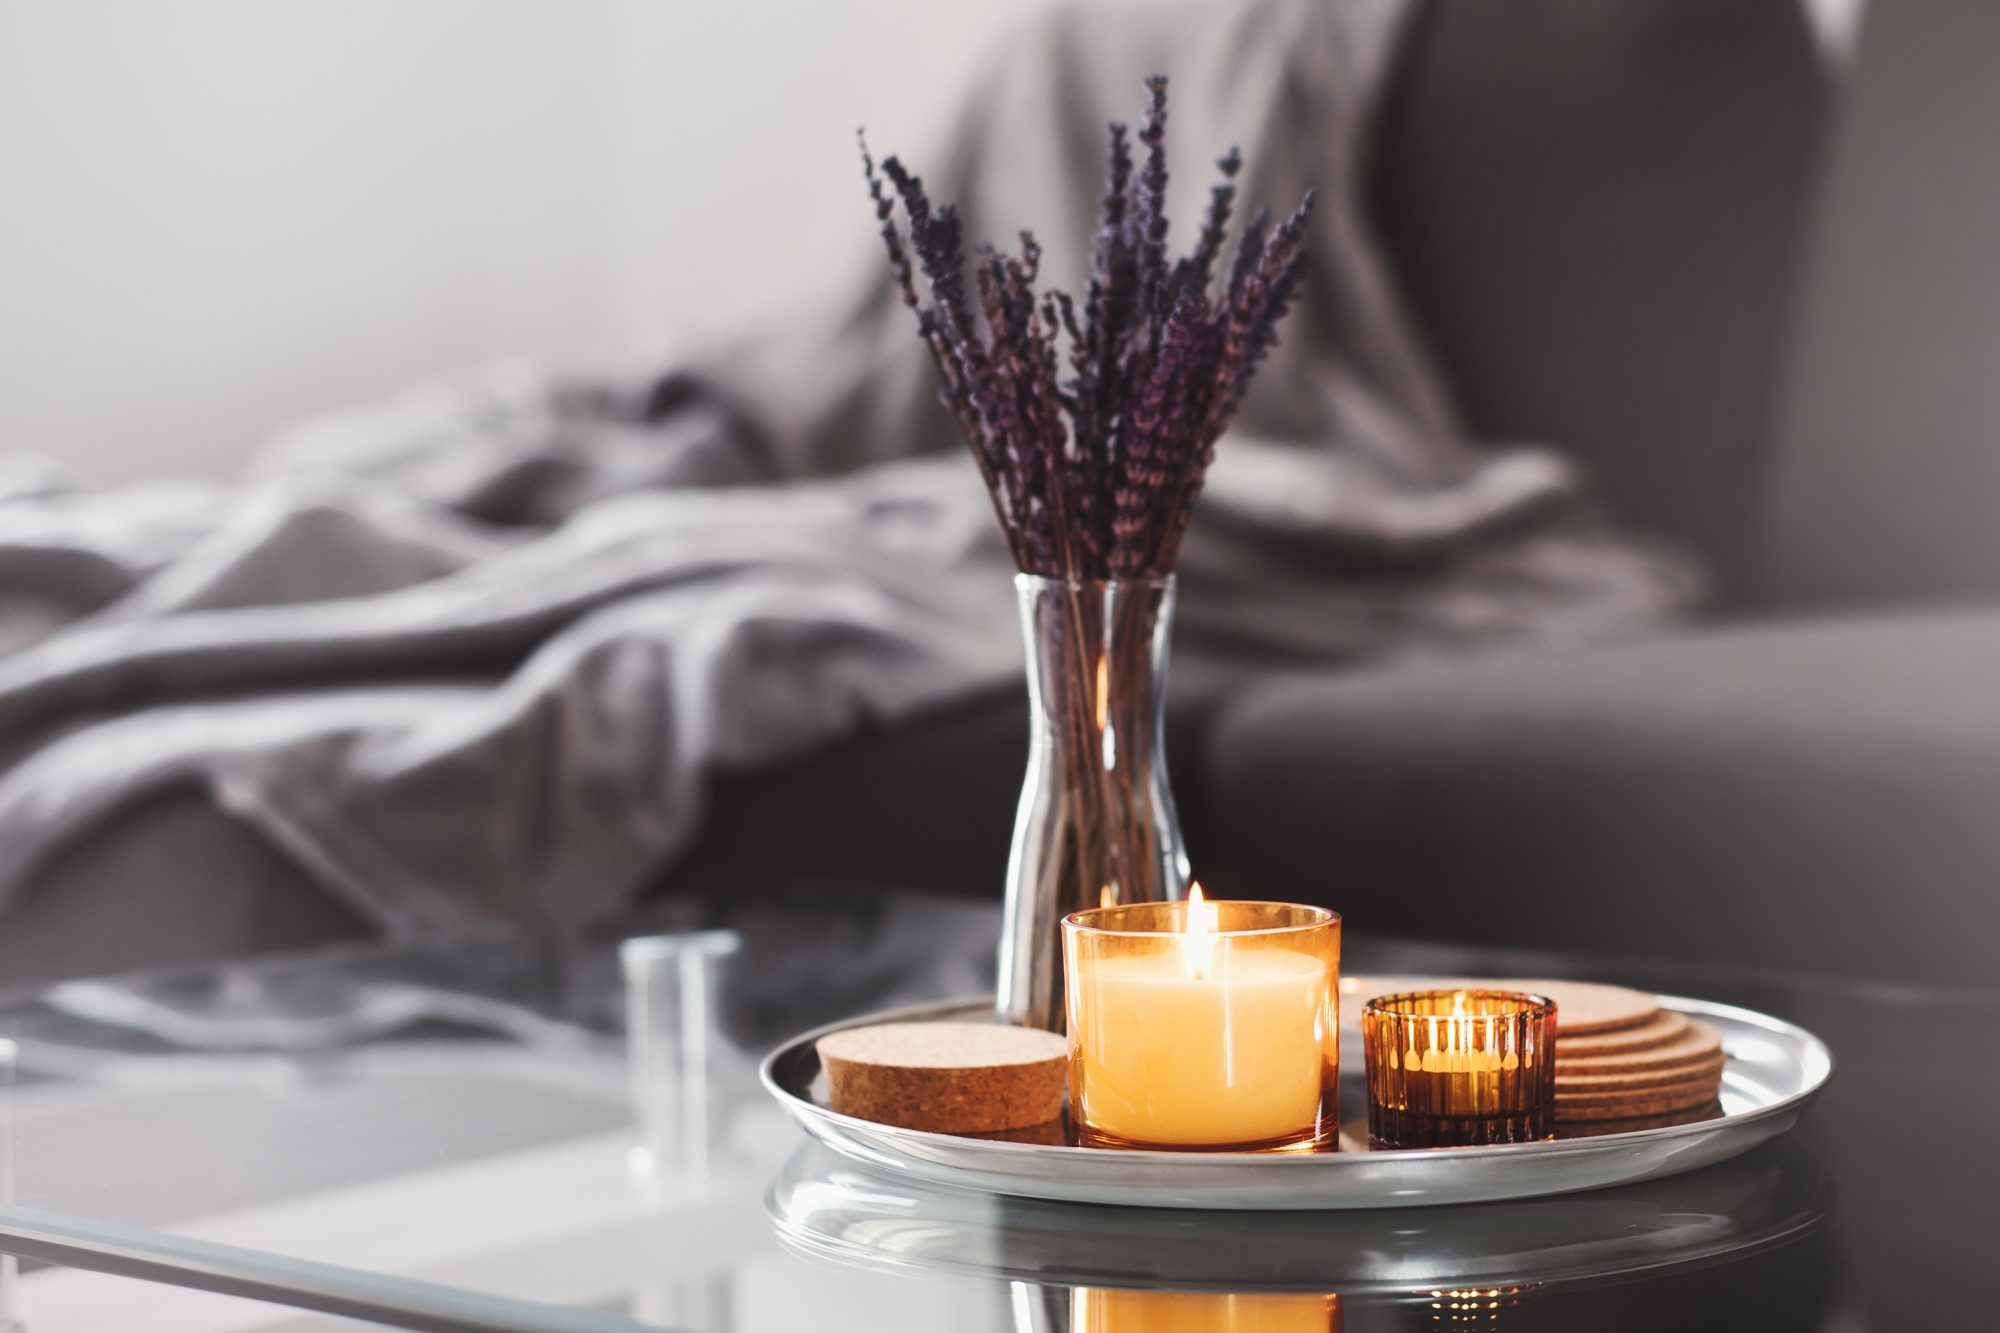 Upscale Home Fragrances Are Getting More Creative | InStyle